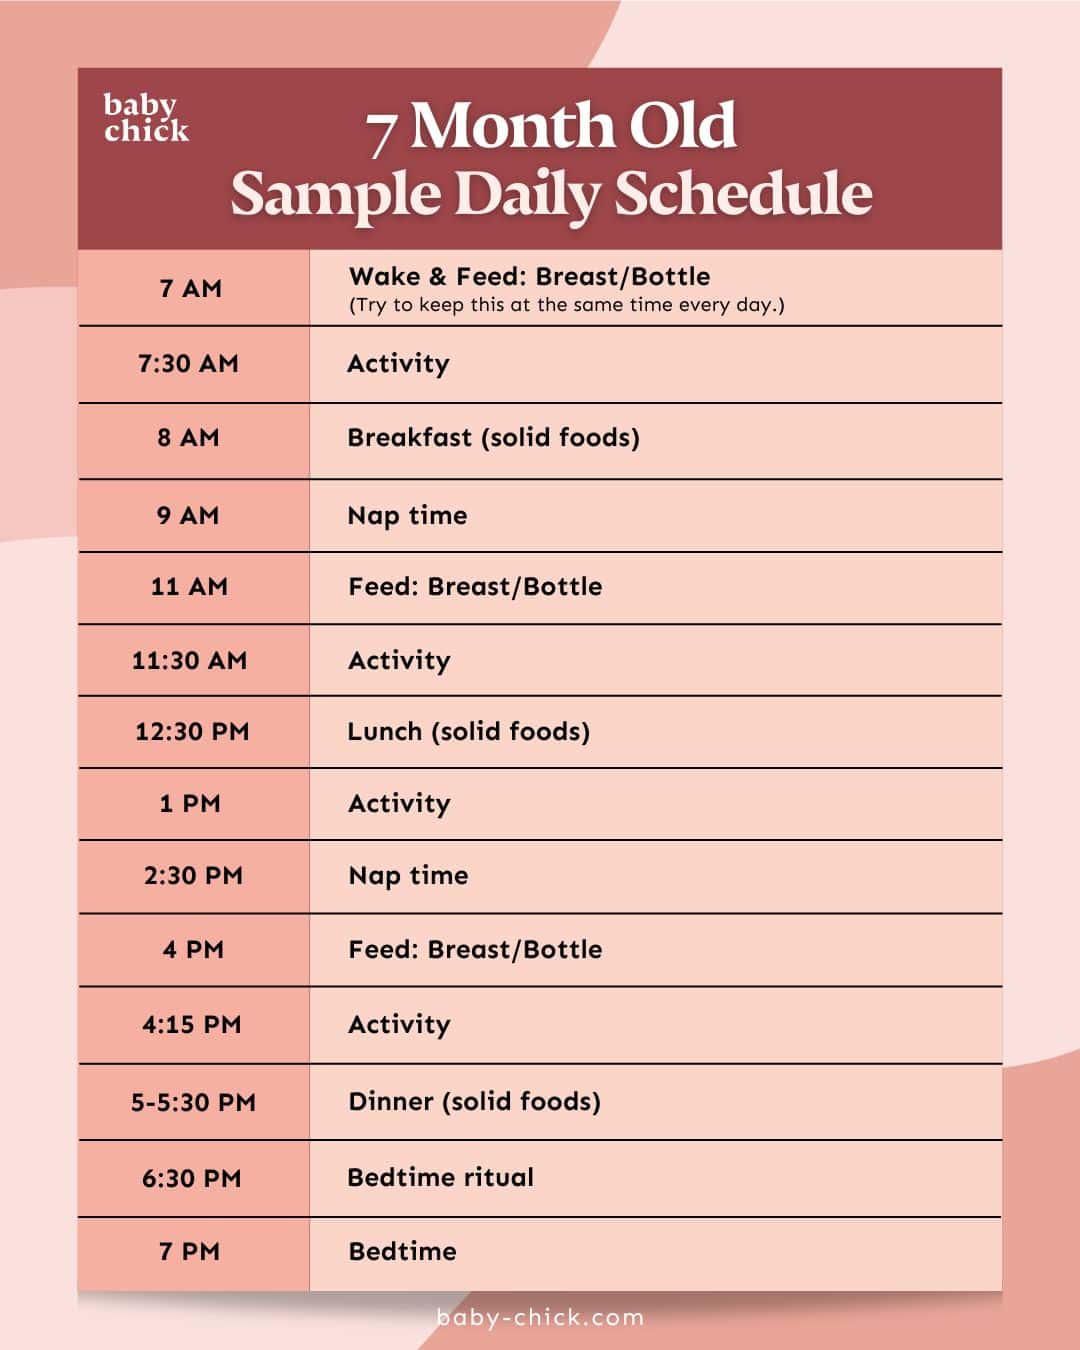 7 month old sample daily schedule graphic